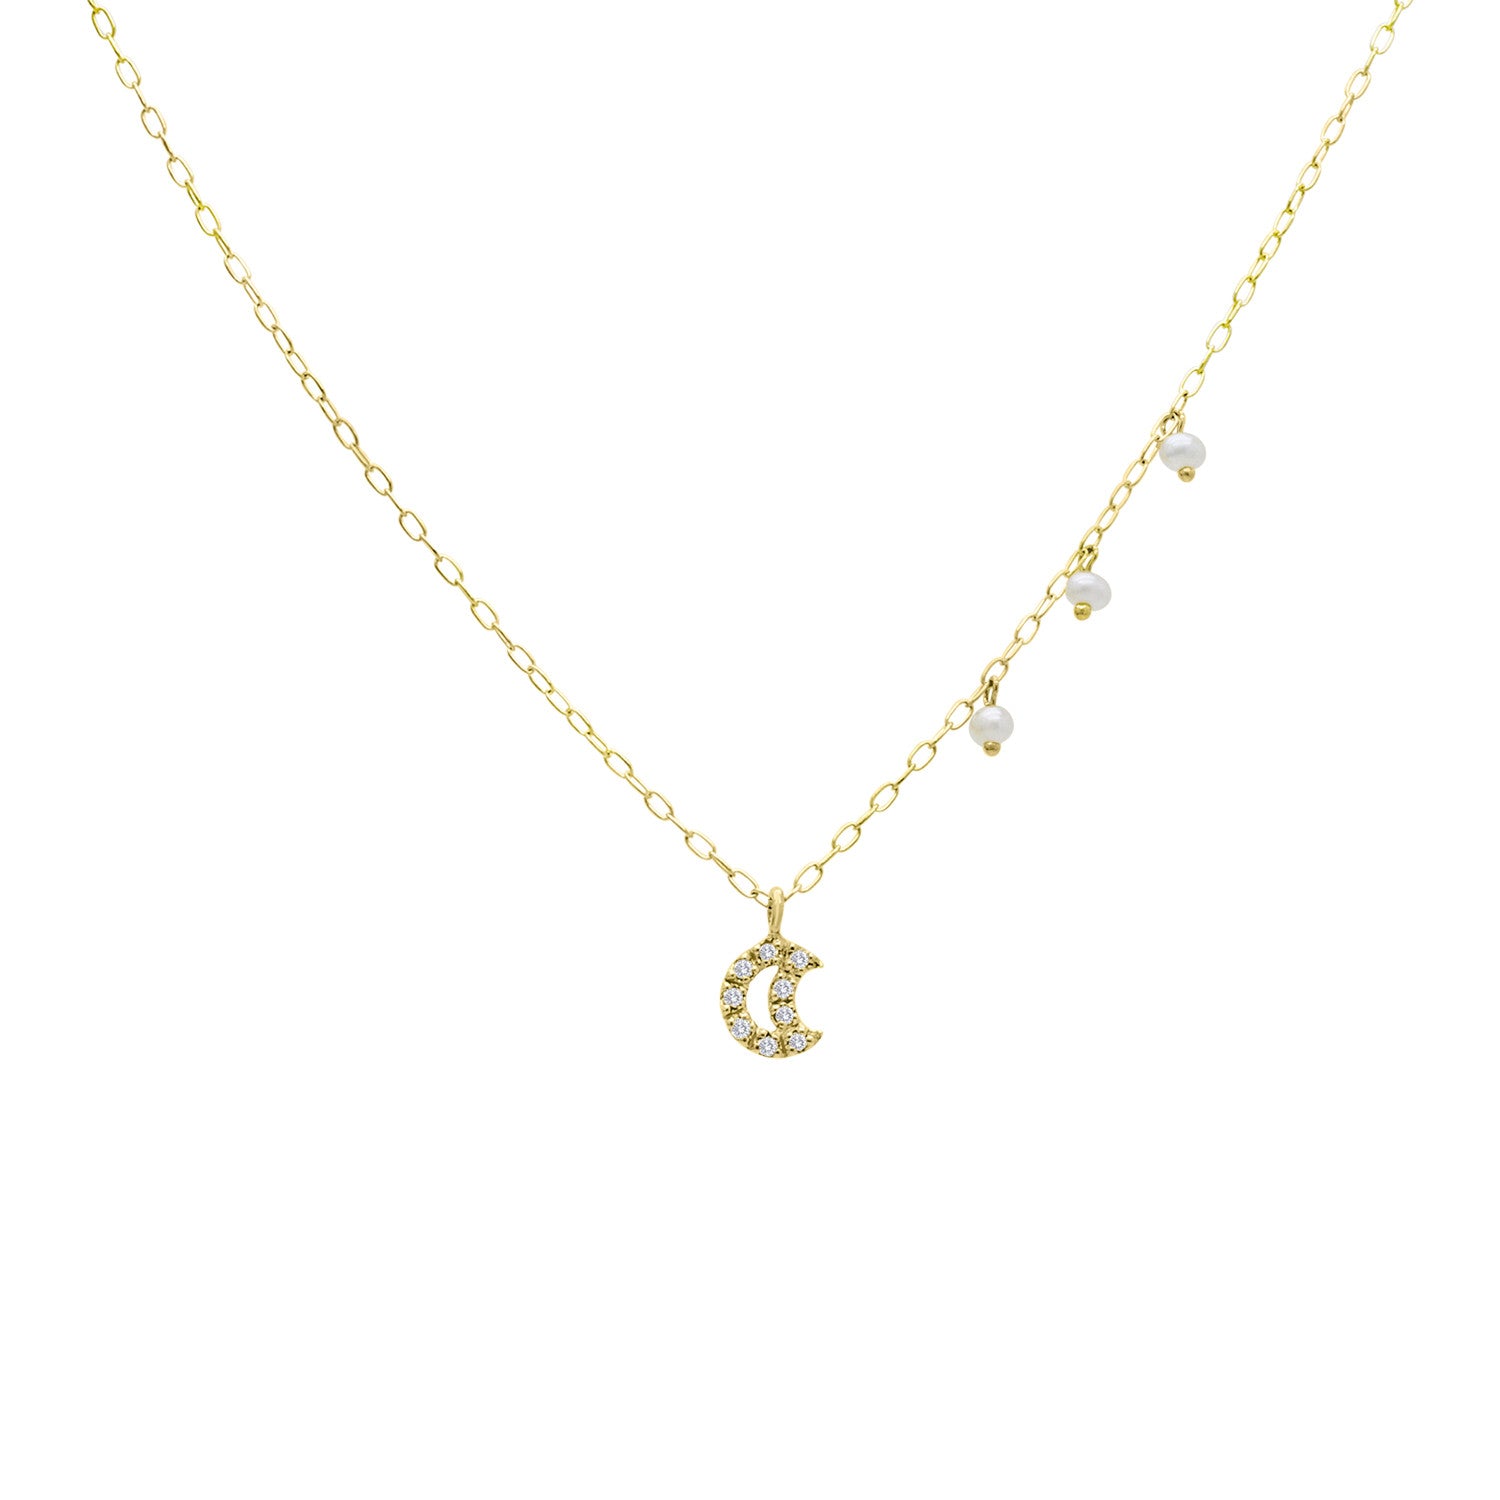 Meira T 14k Diamond Moon Necklace with Pearls